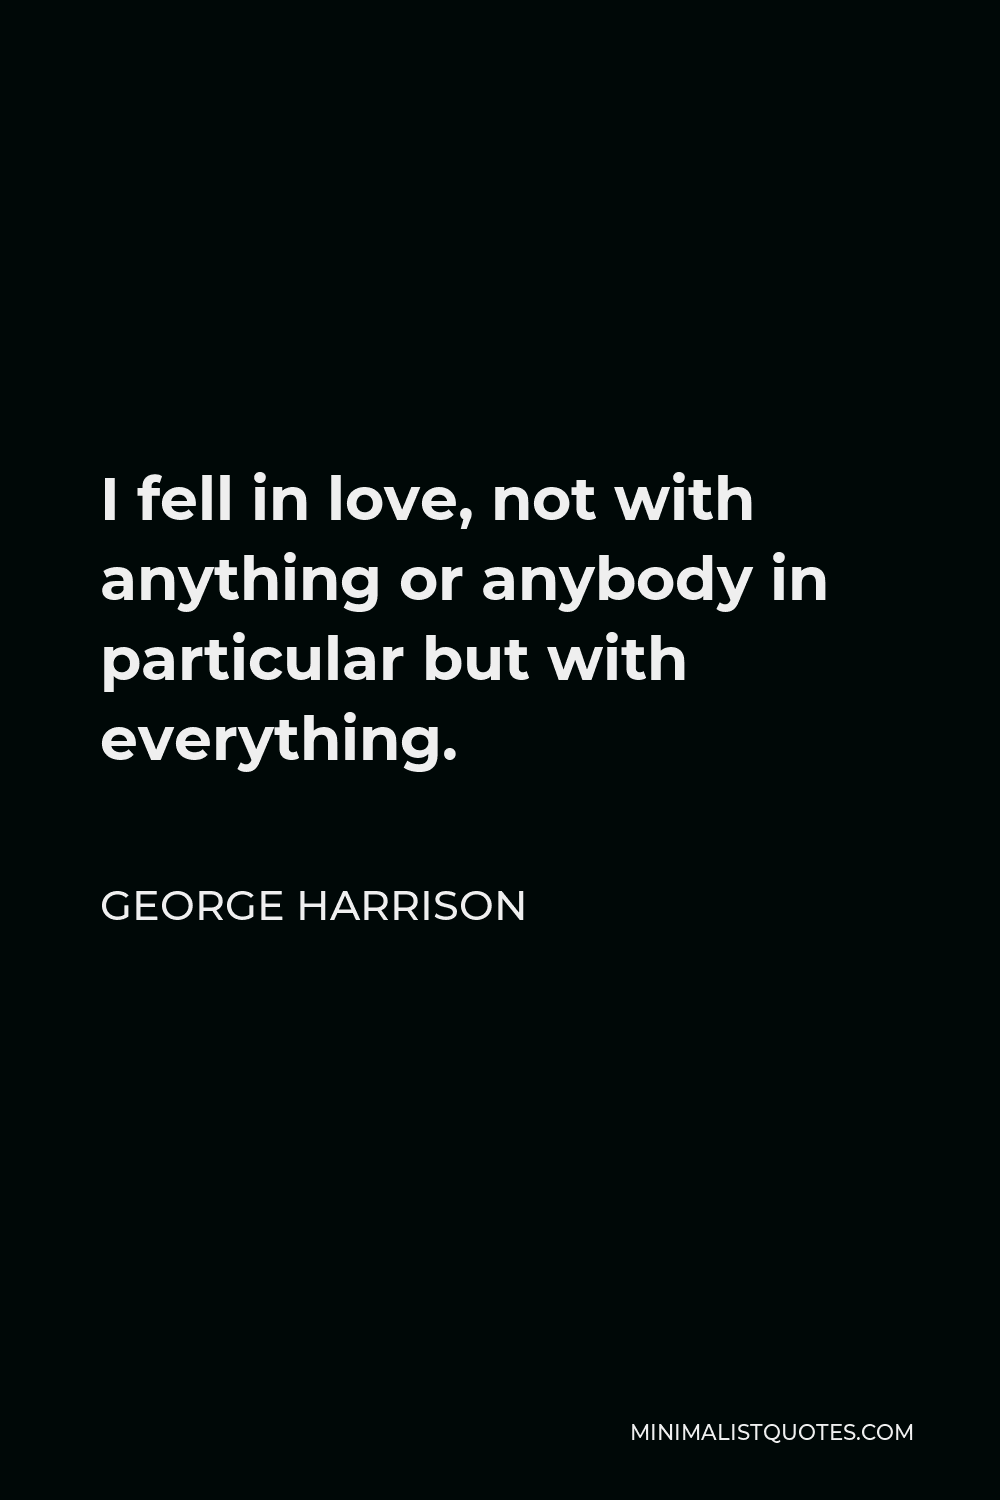 George Harrison Quote - I fell in love, not with anything or anybody in particular but with everything.